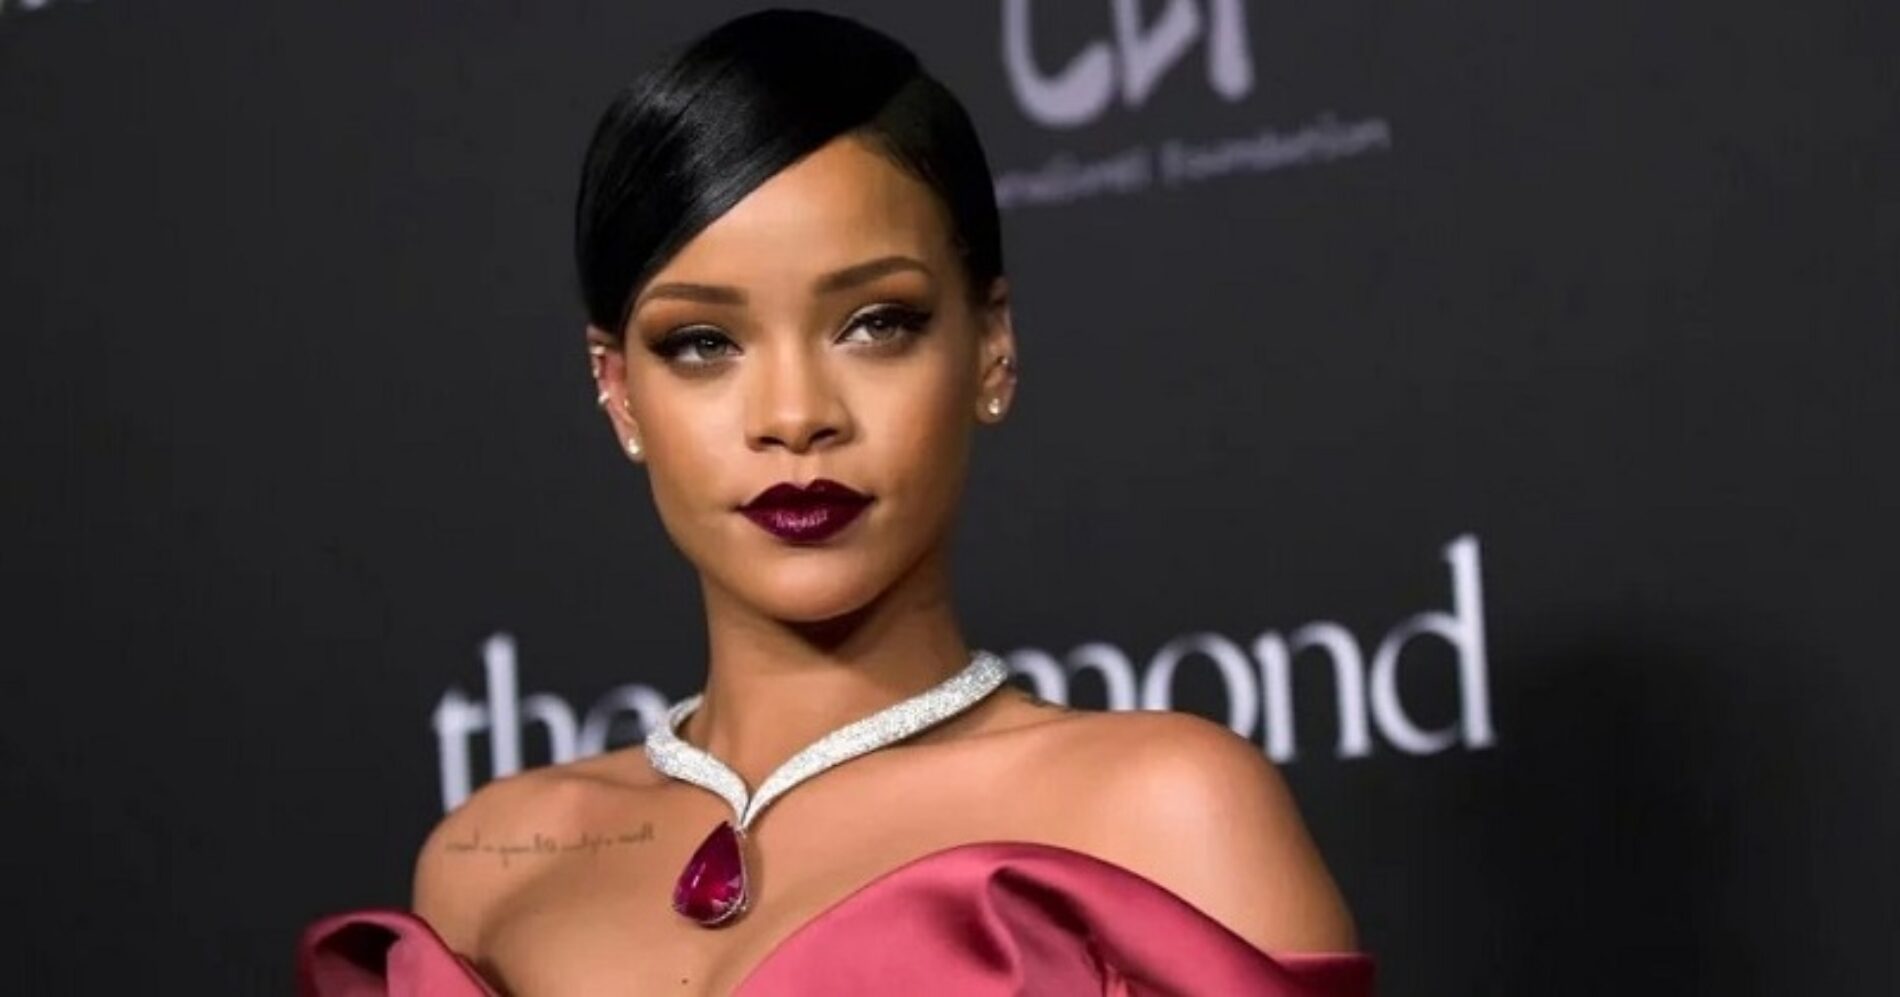 Rihanna is a Billionaire, and the Richest Female Musician in the World